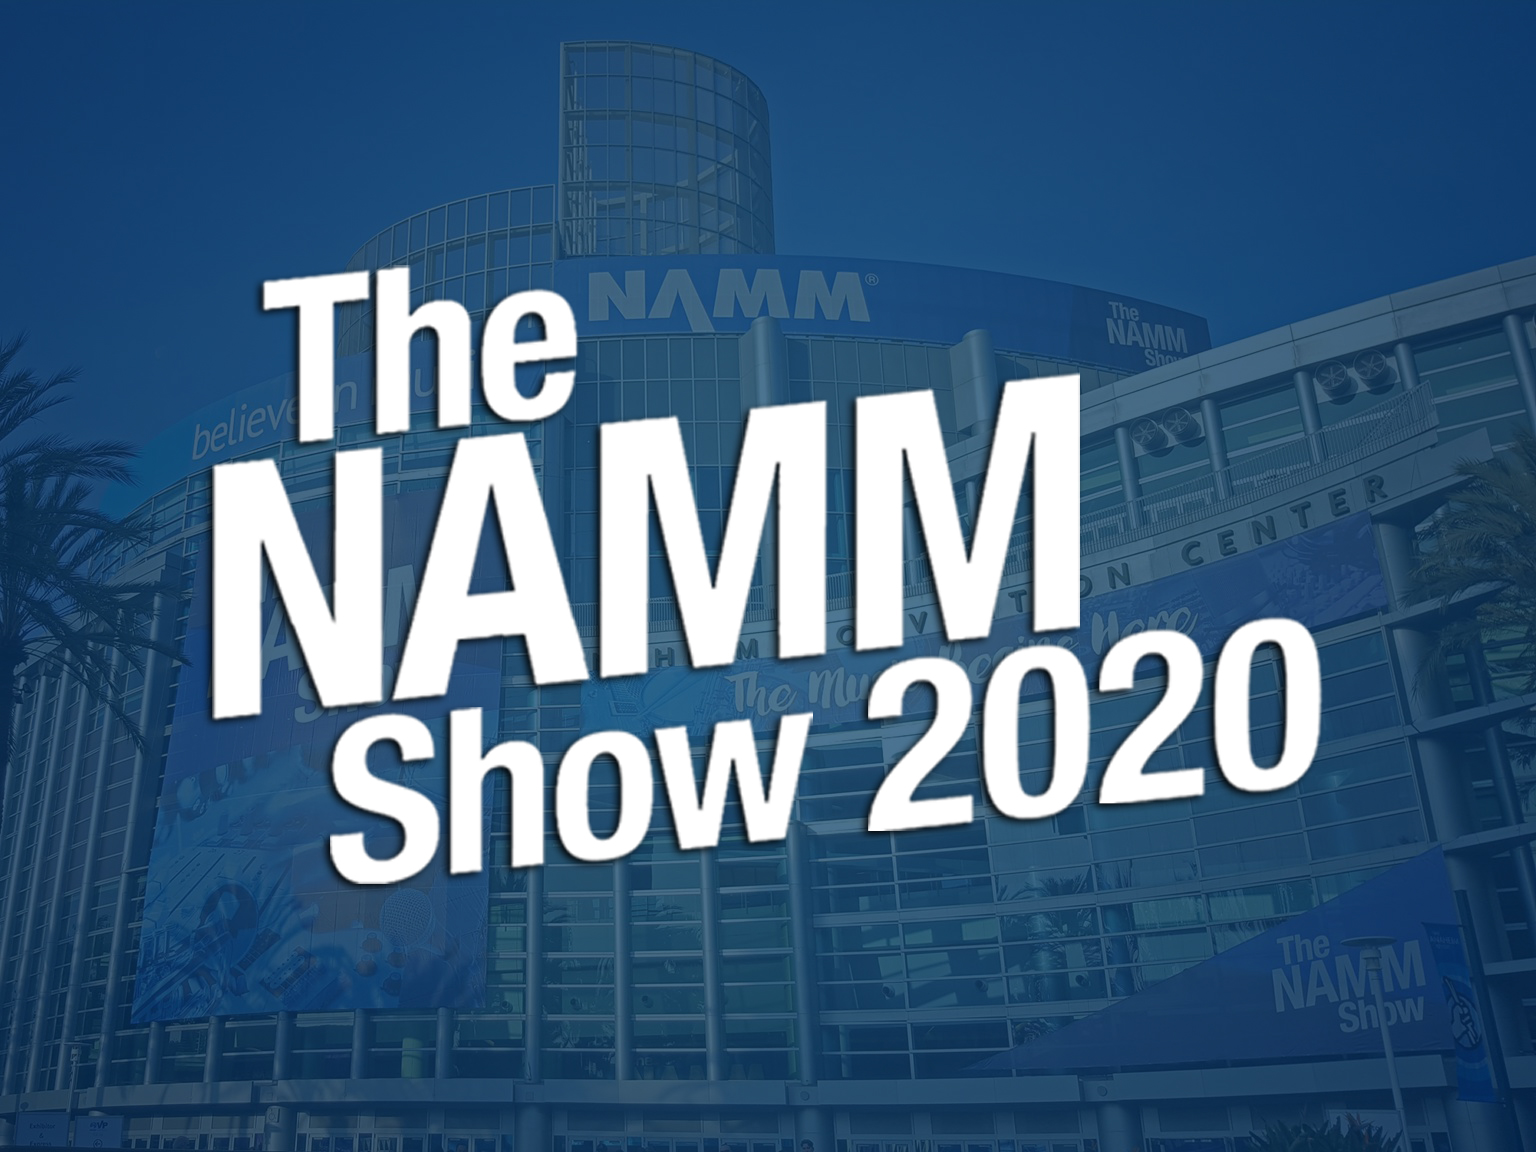 We are at the 2020 winter NAMM show!